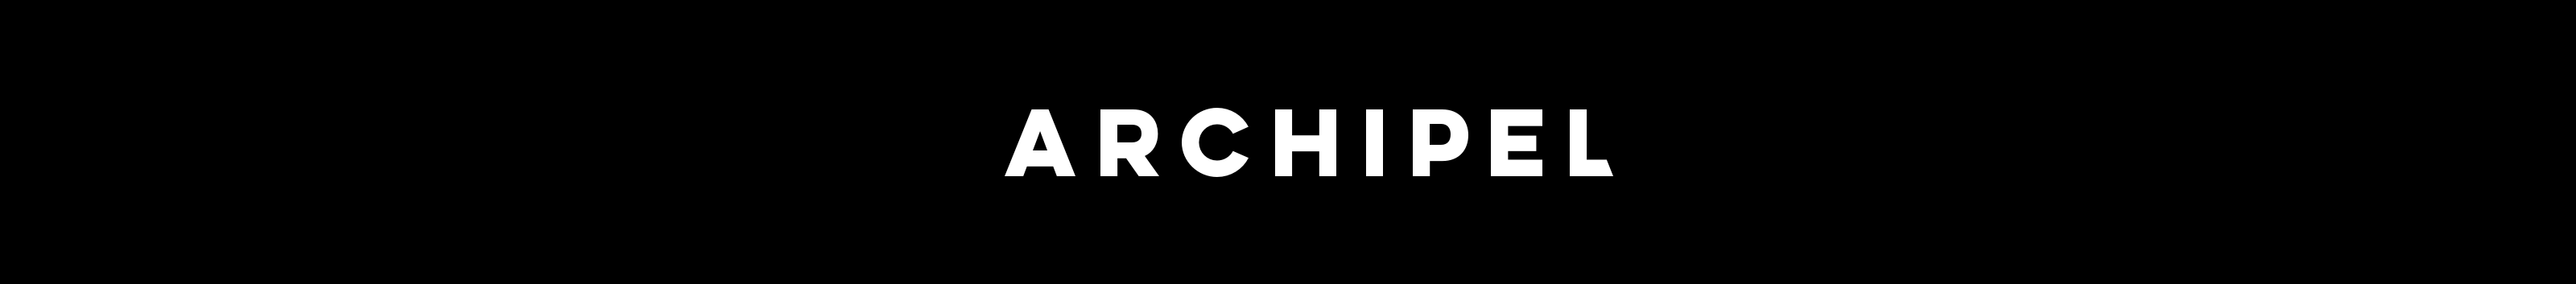 Archipel Montreal's profile banner